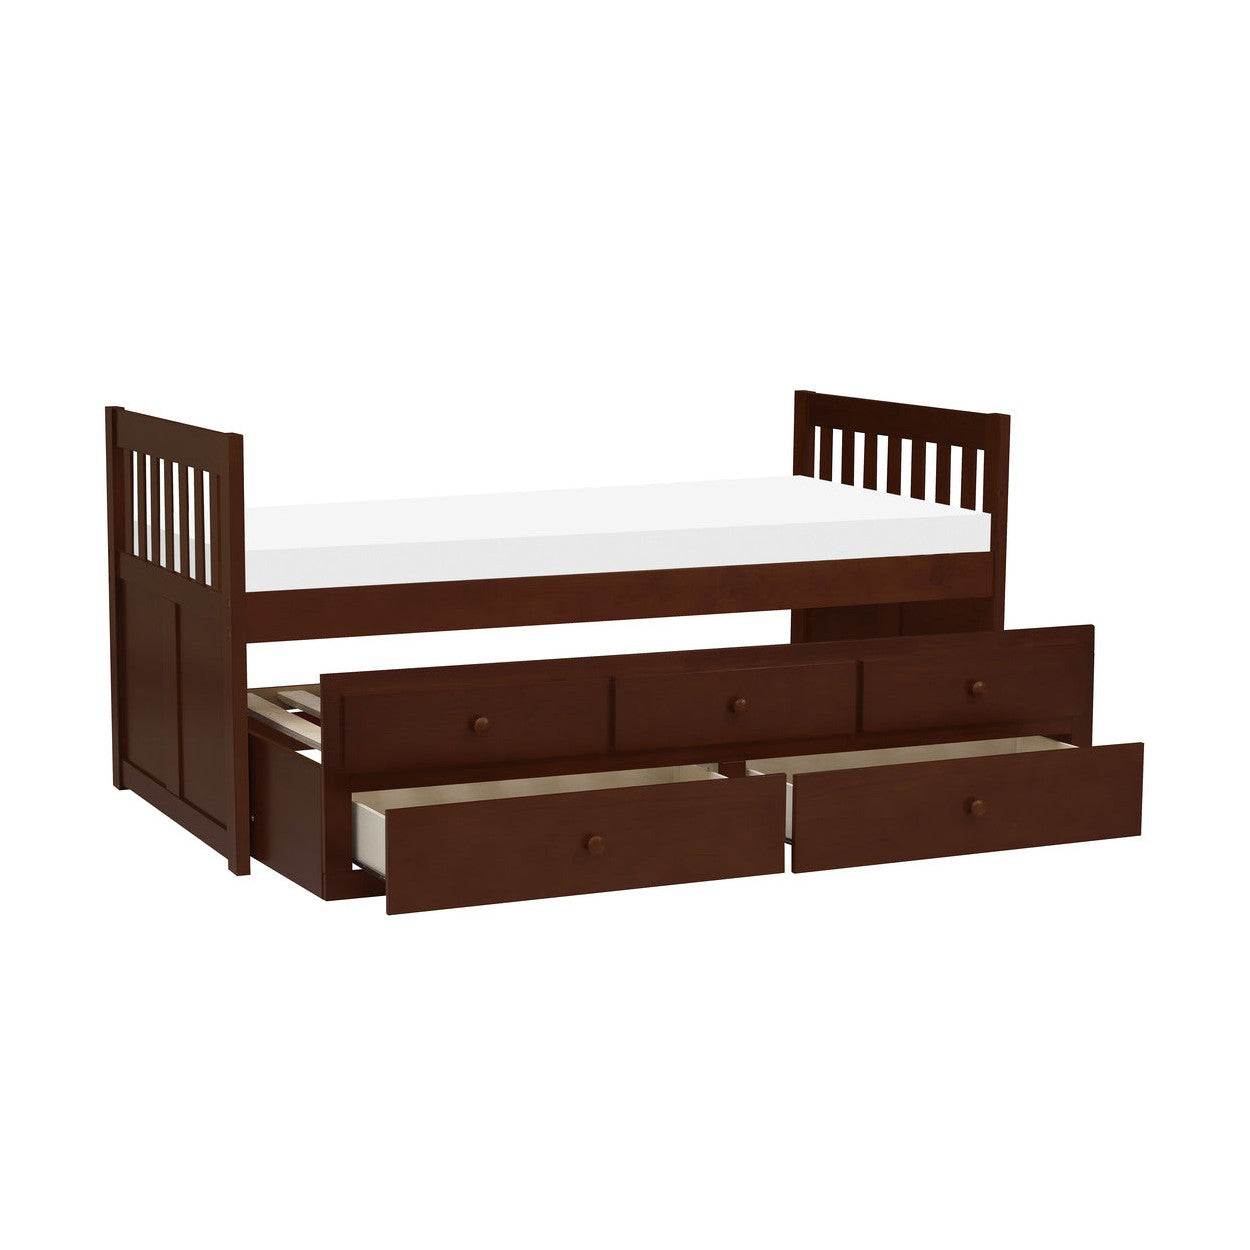 (2) TWIN/TWIN TRUNDLE BED WITH TWO STORAGE DRAWERS, DRK CHRY B2013PRDC-1*